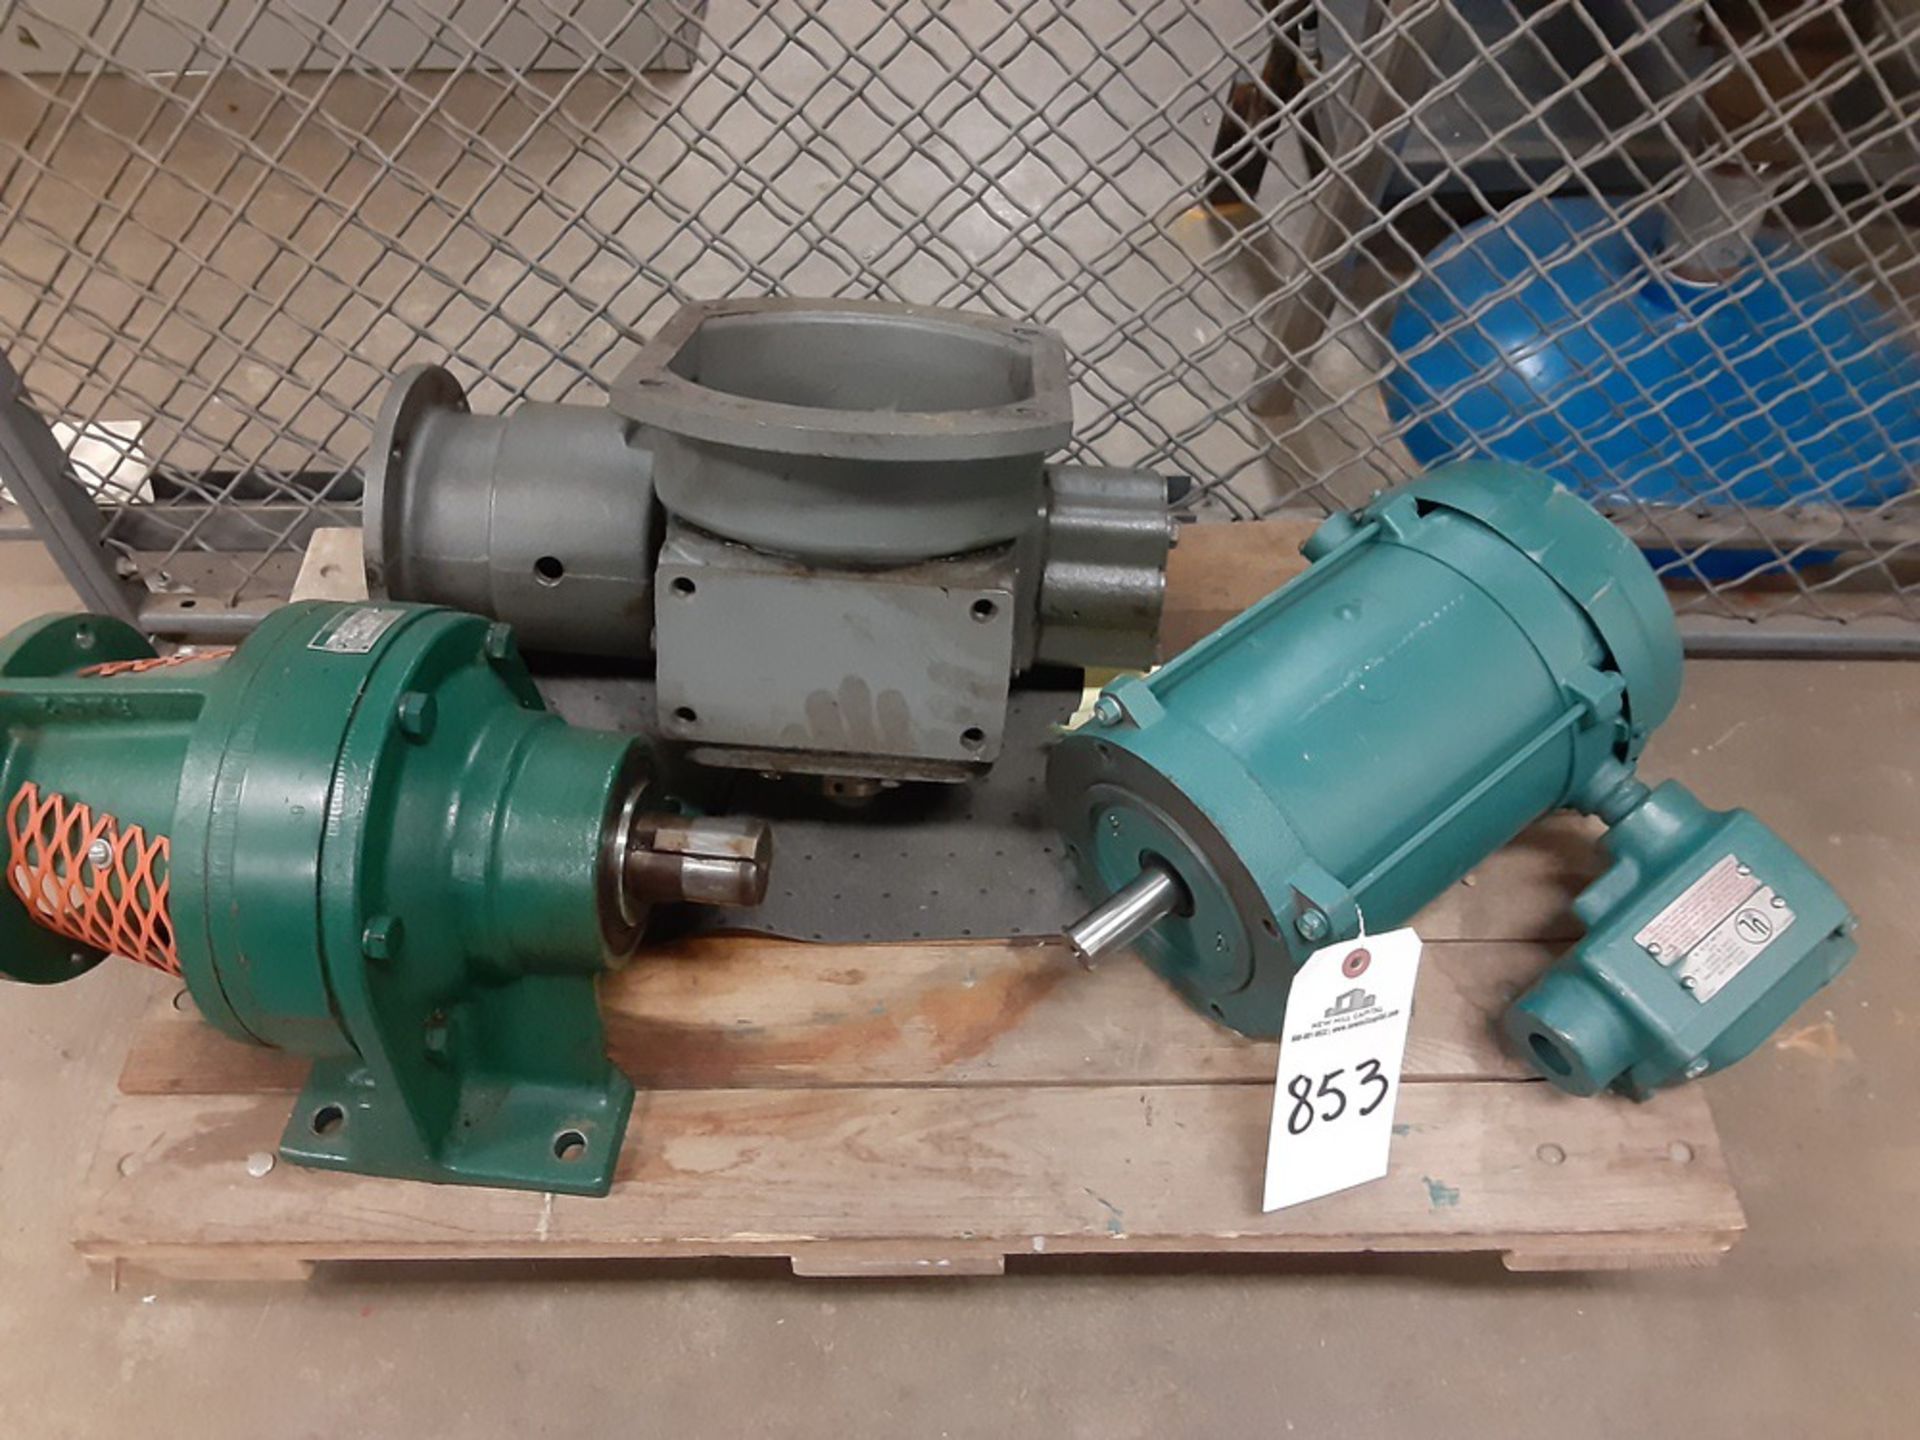 Lot of (3) Spare Parts - Subject to Bulk Bid Lot 845B -The Greater of the Aggregate | Rig Fee: $50